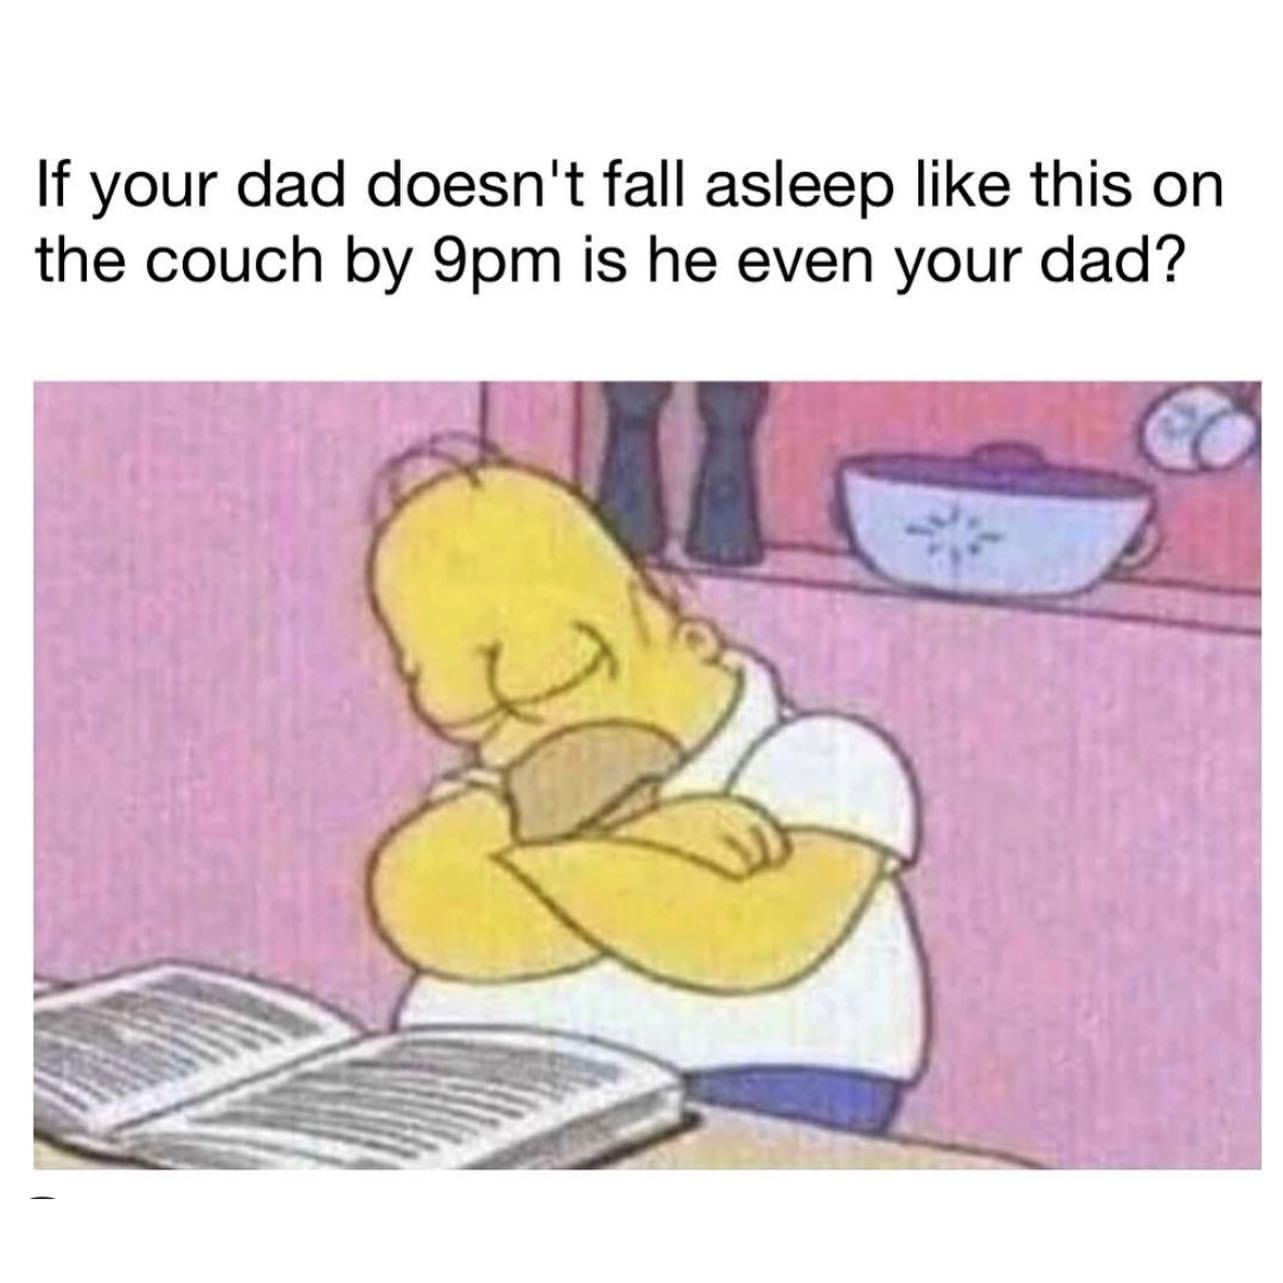 If your dad doesn't fall asleep like this on the couch by 9pm is he even your dad?